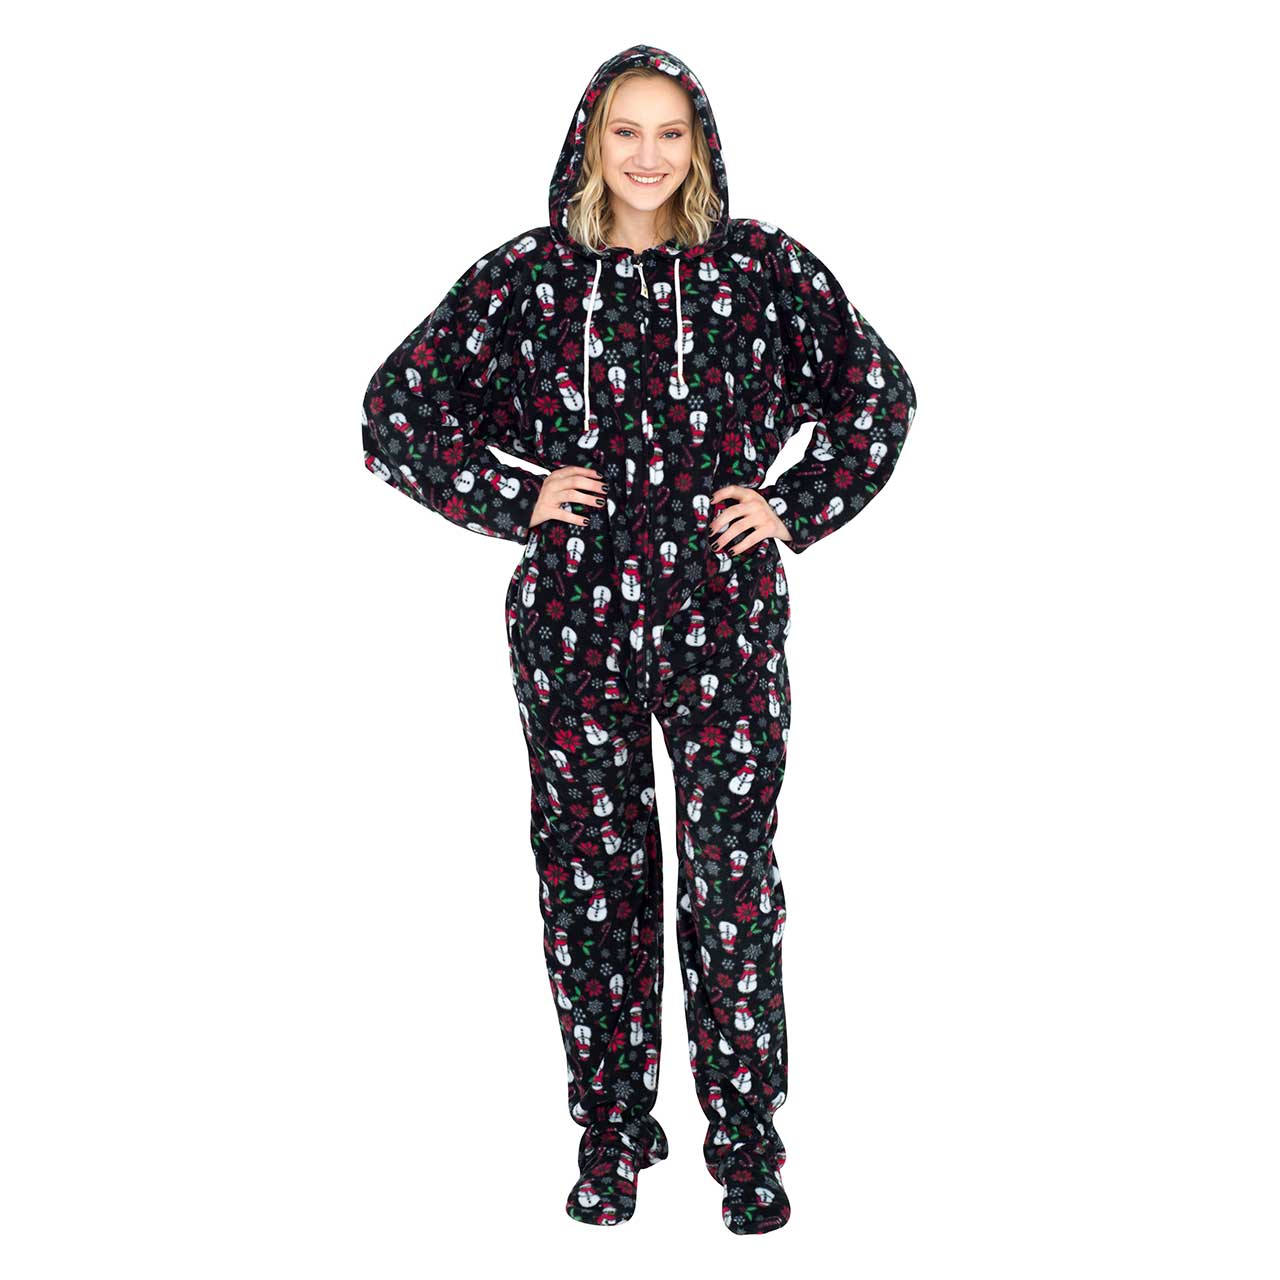 Snowmen and Candy Canes Black Ugly Christmas Pajama Suit with Hood,Specials : uglyschristmassweater.com